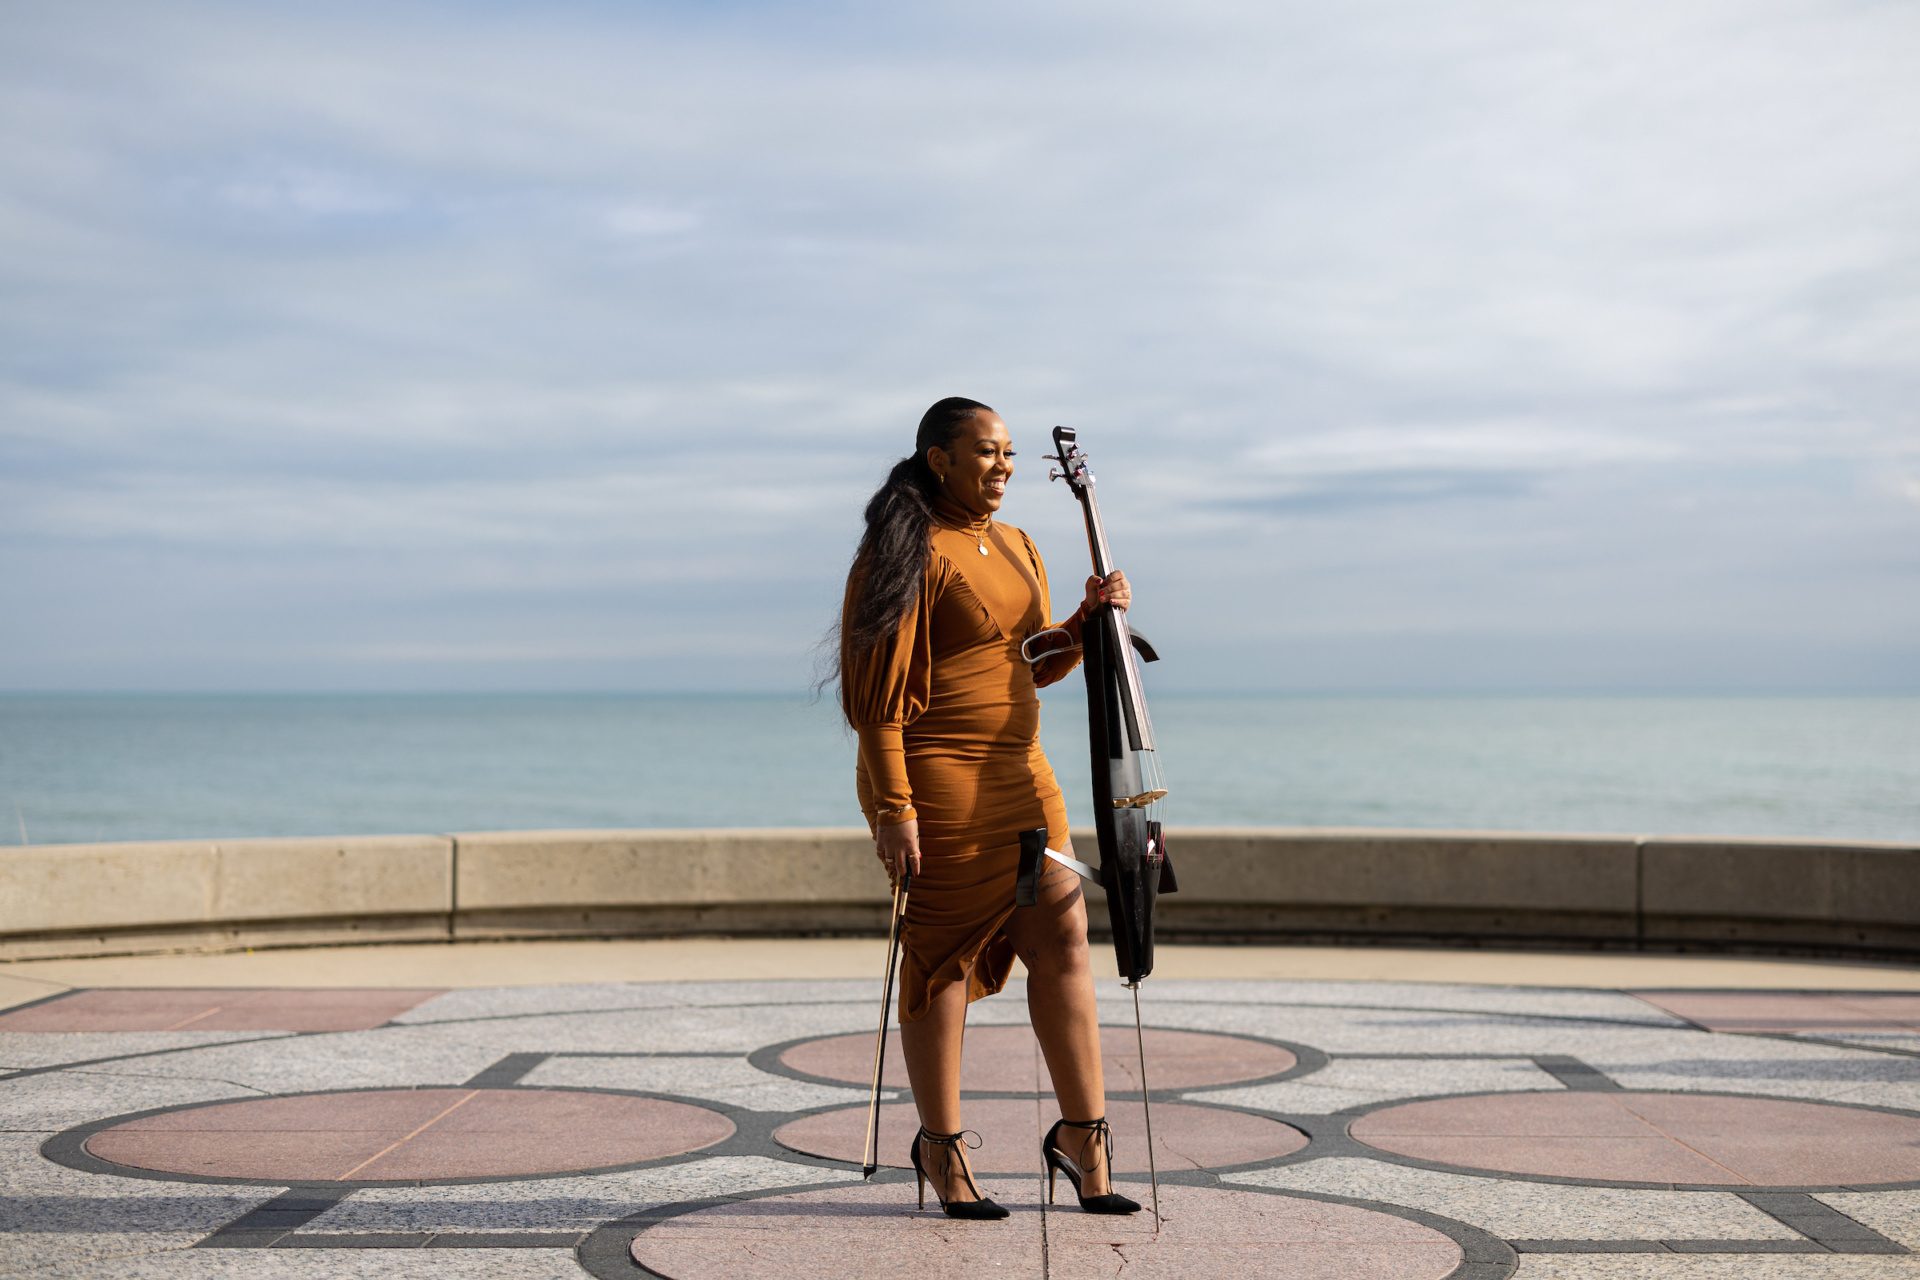 A Black woman stands on a brick sidewalk in front of a lake and holds a cello